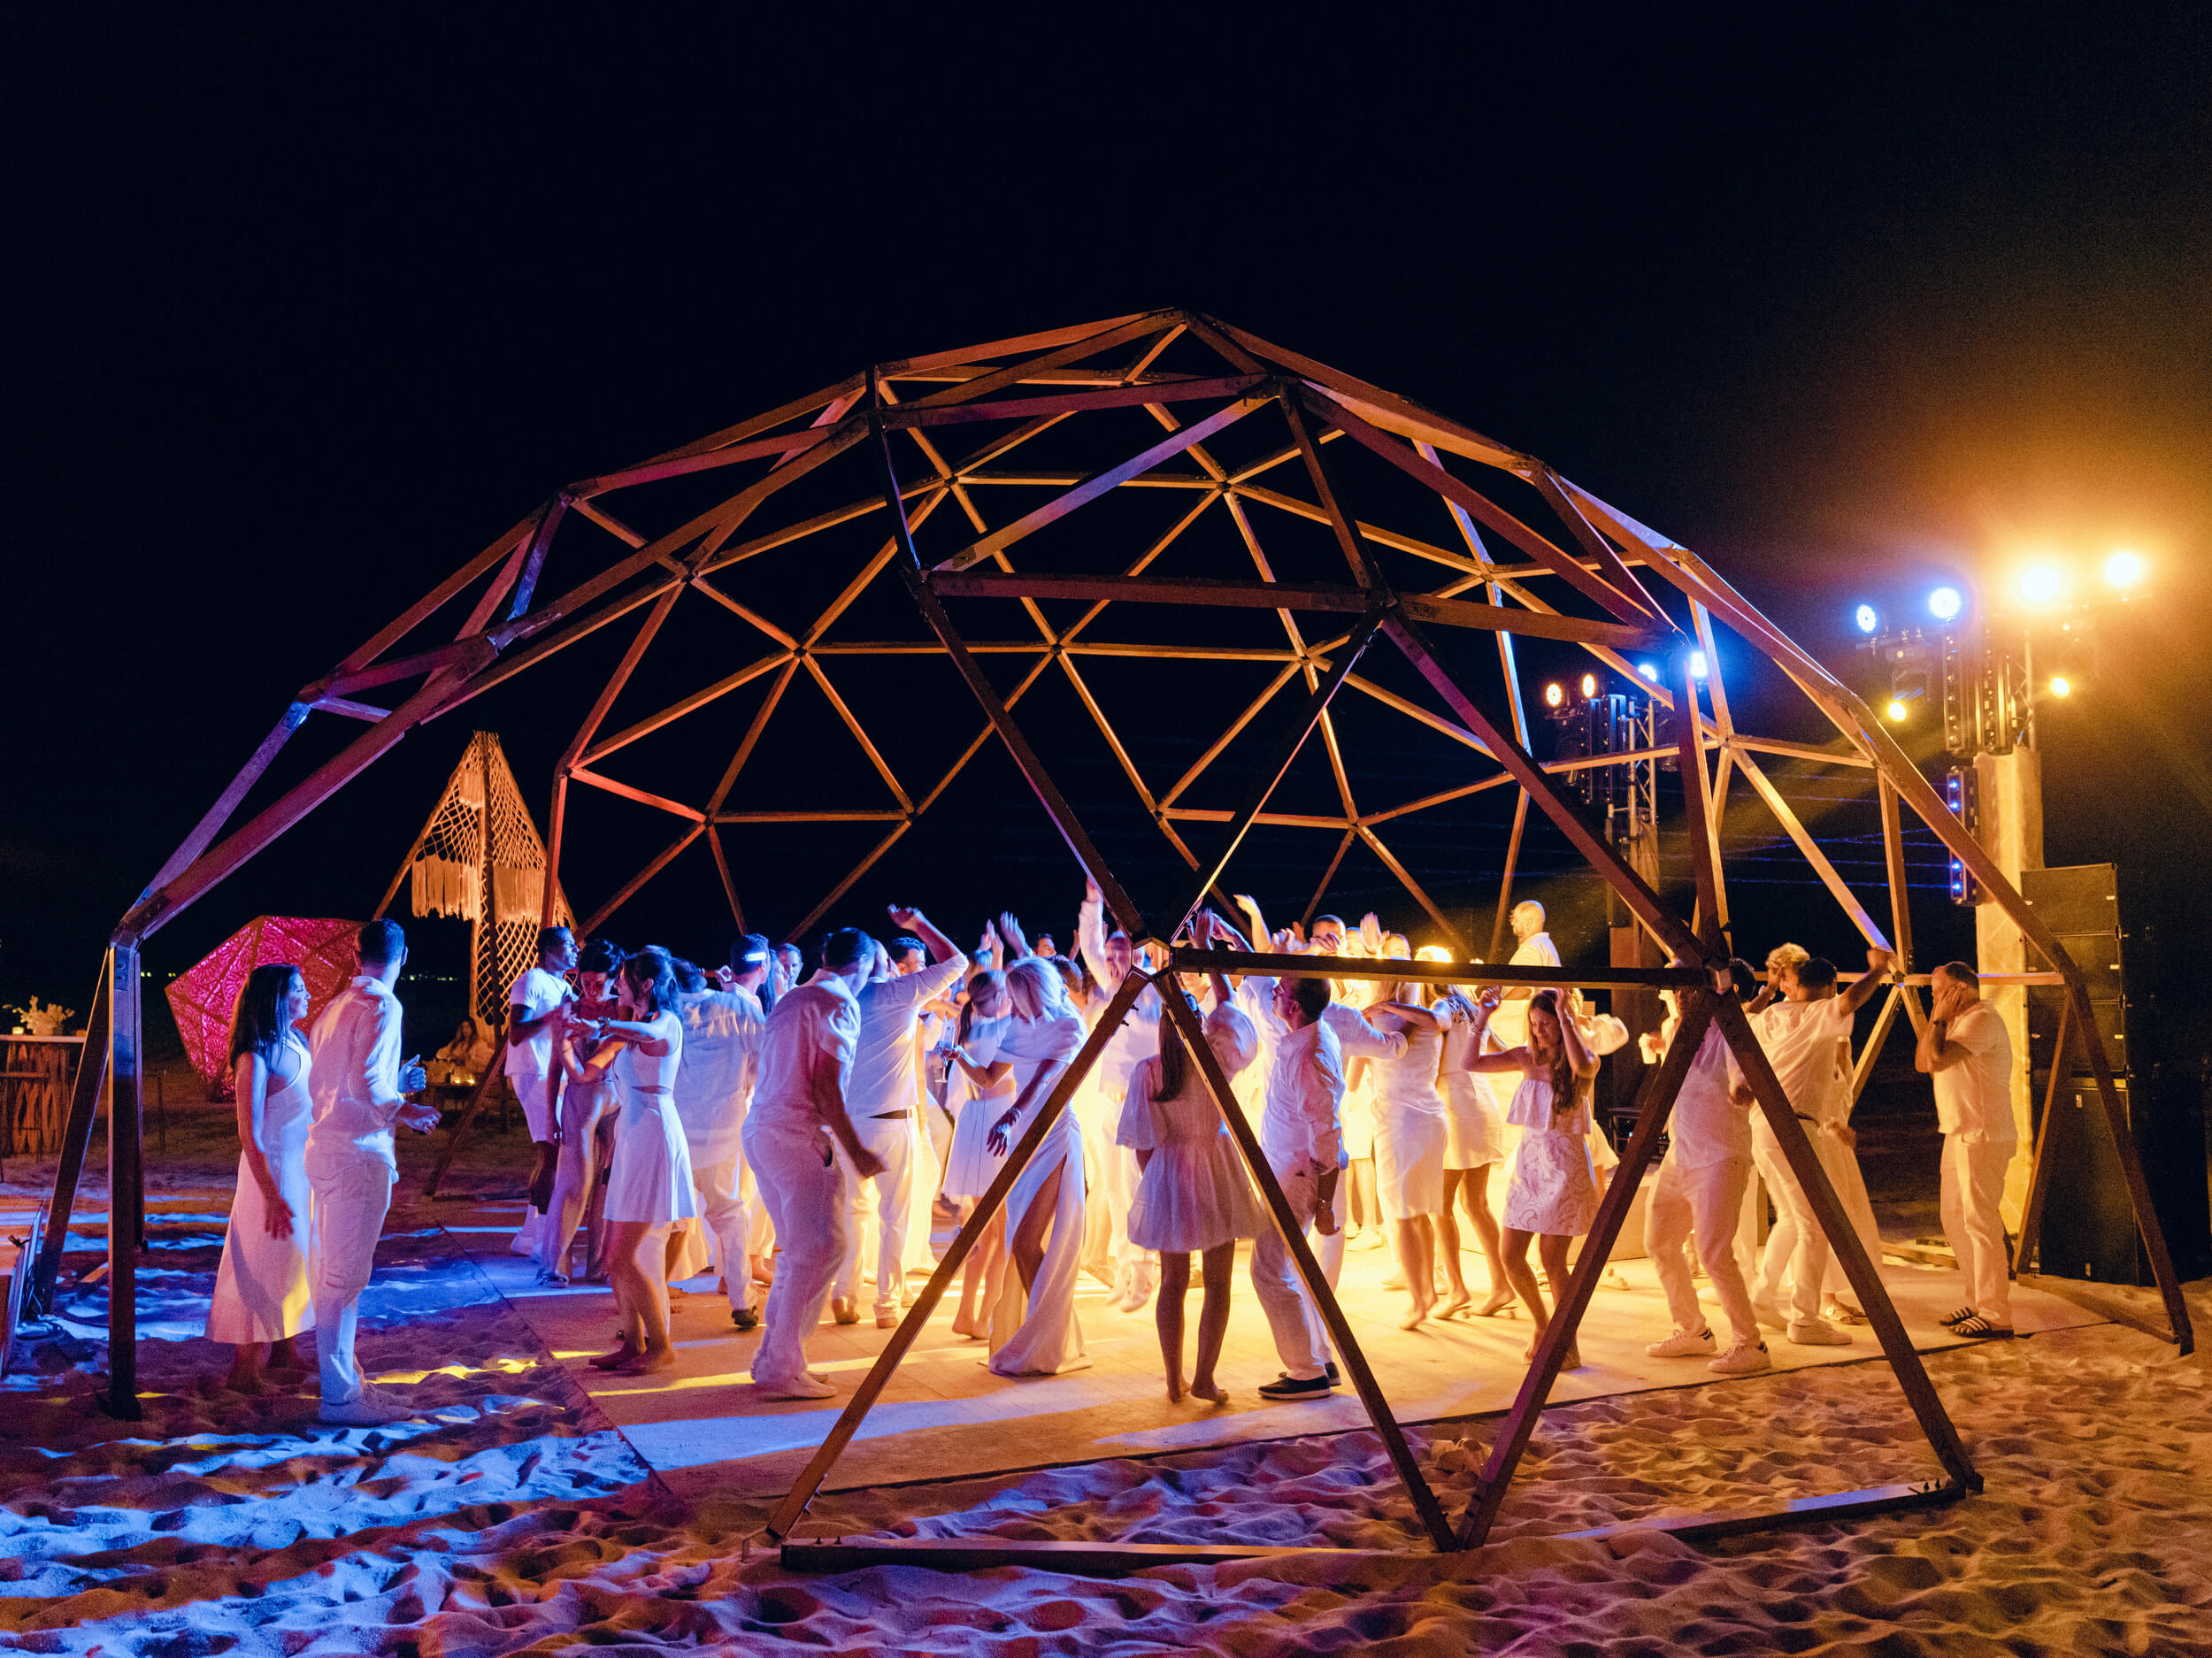 Guests dancing under a custom built structure